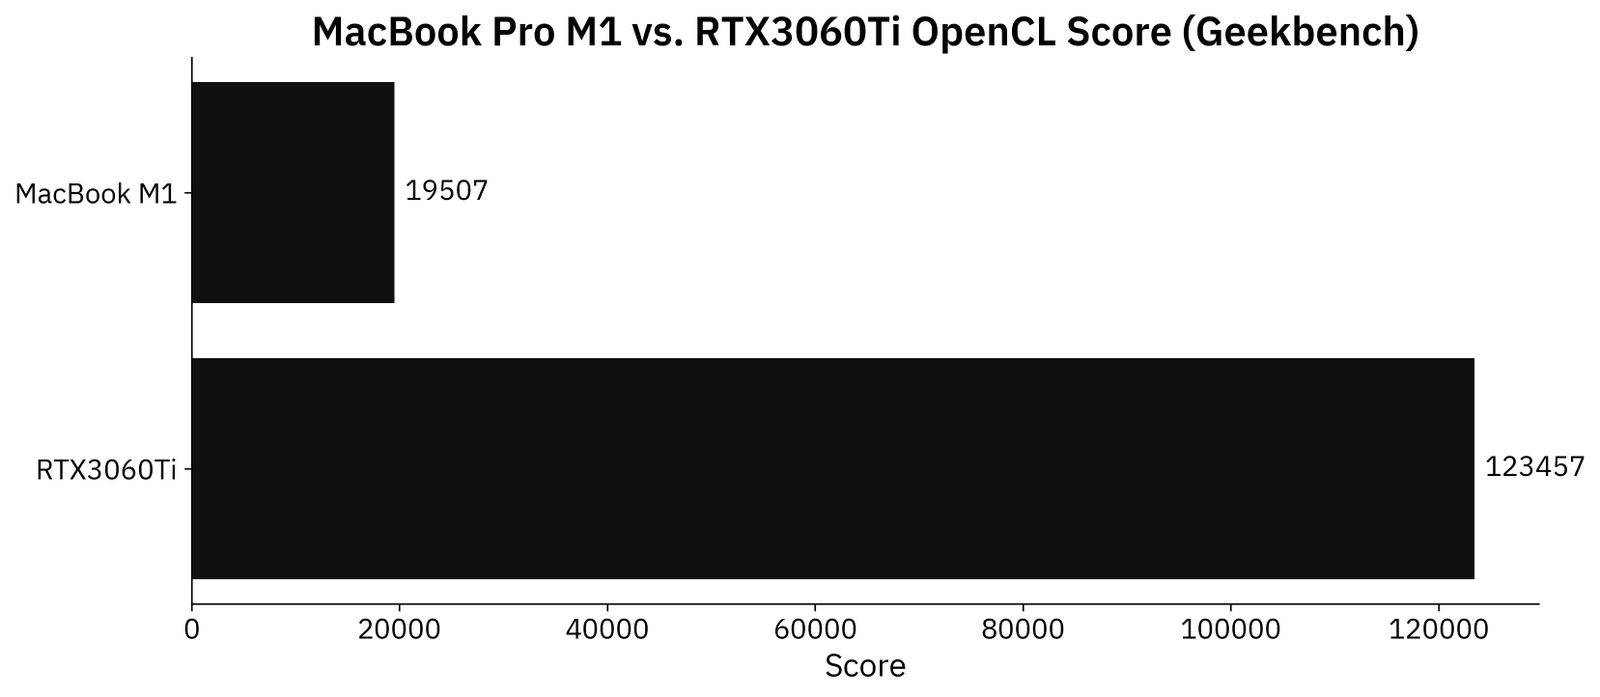 Image 4 - Geekbench OpenCL performance (image by author)